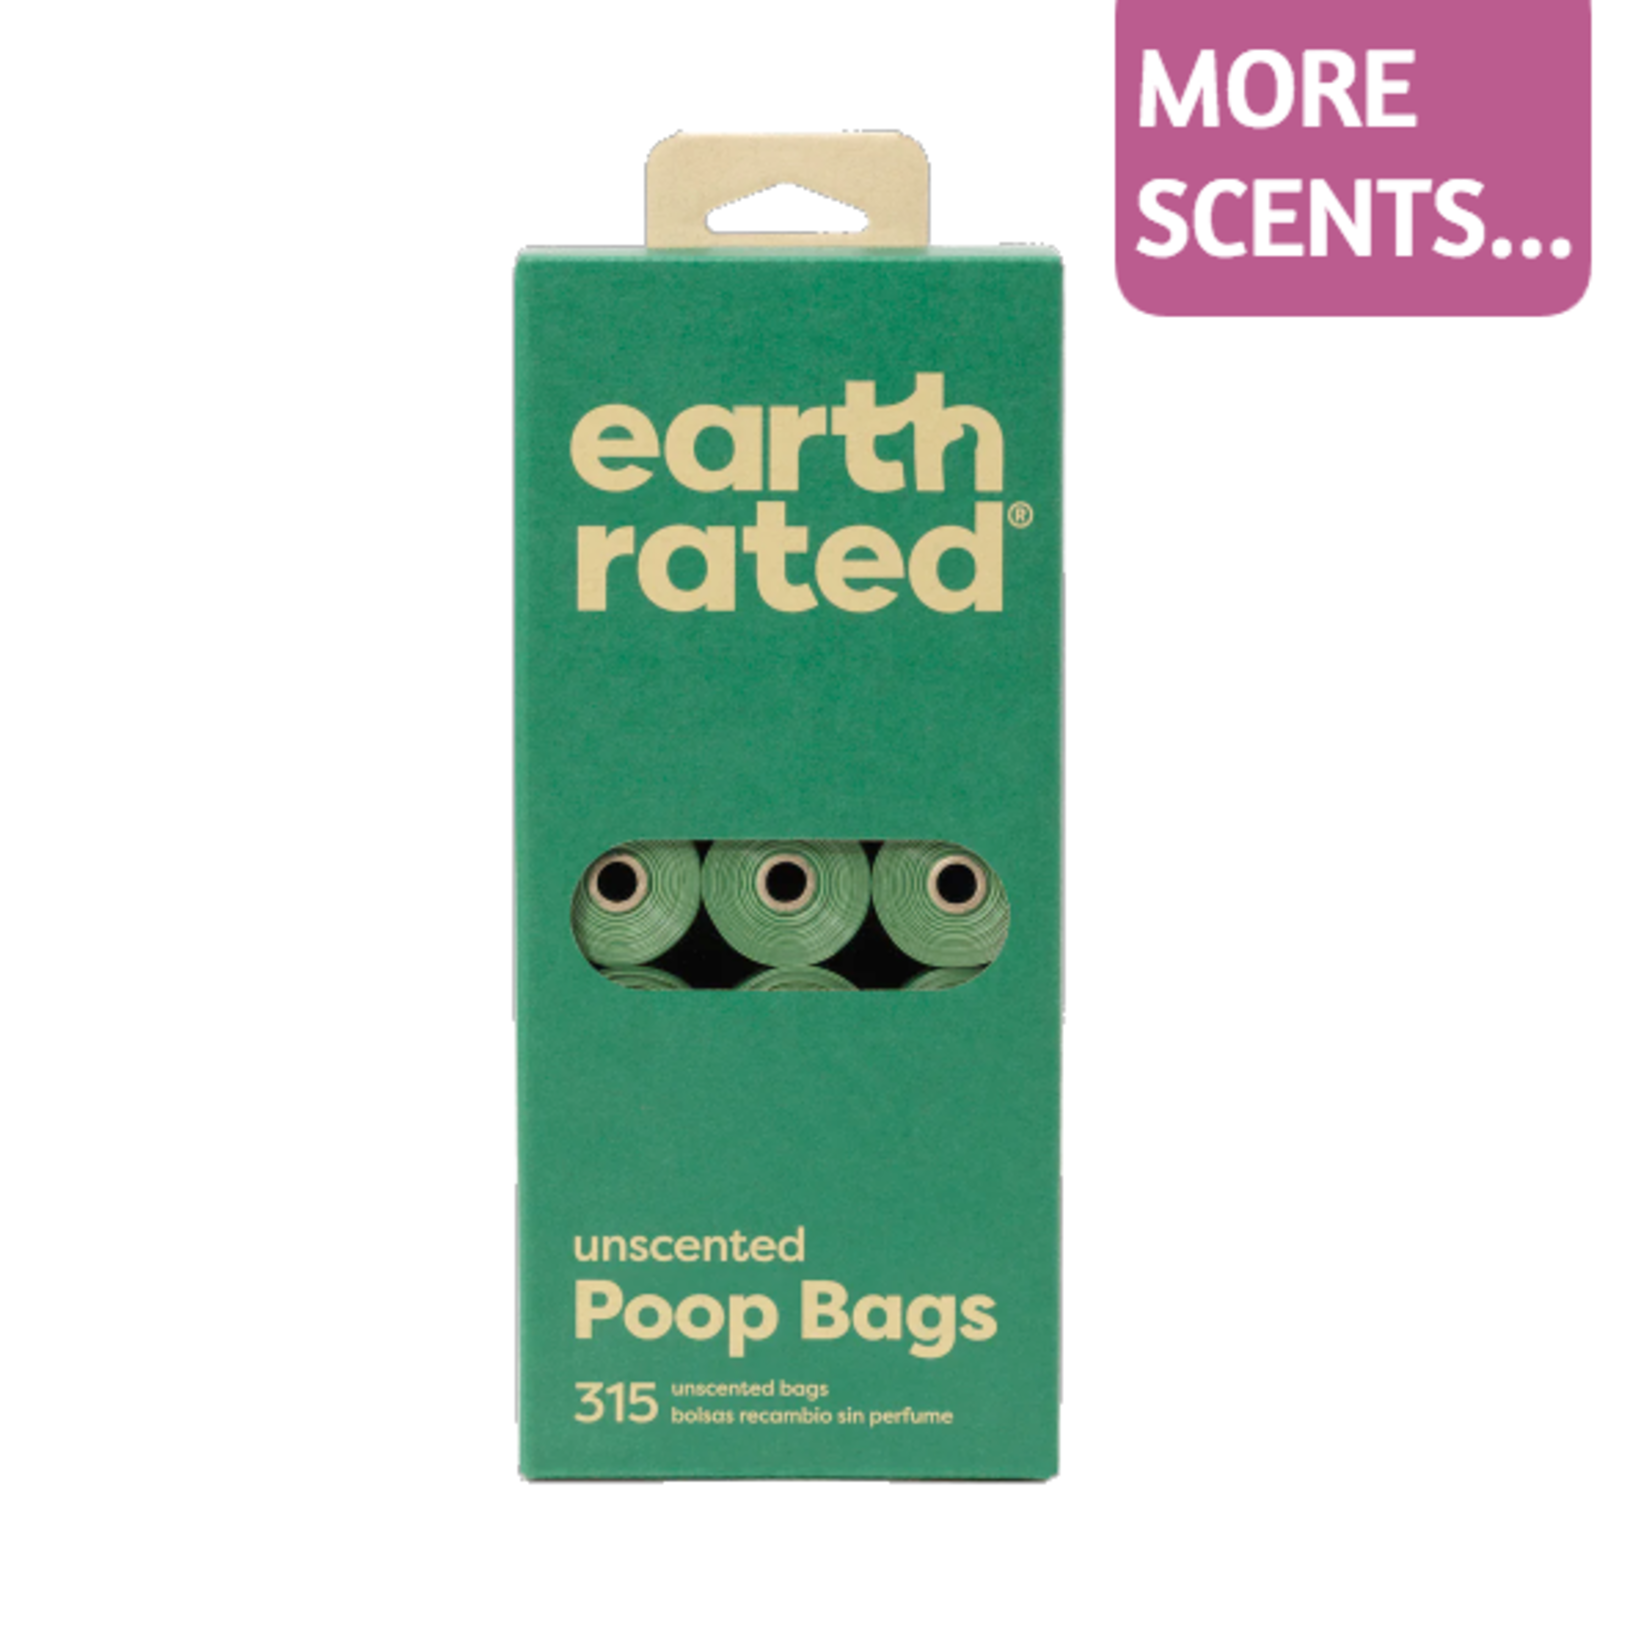 Earth Rated Earth Rated Poop Bags Bulk 315ct 21pk Unscented and Lavender